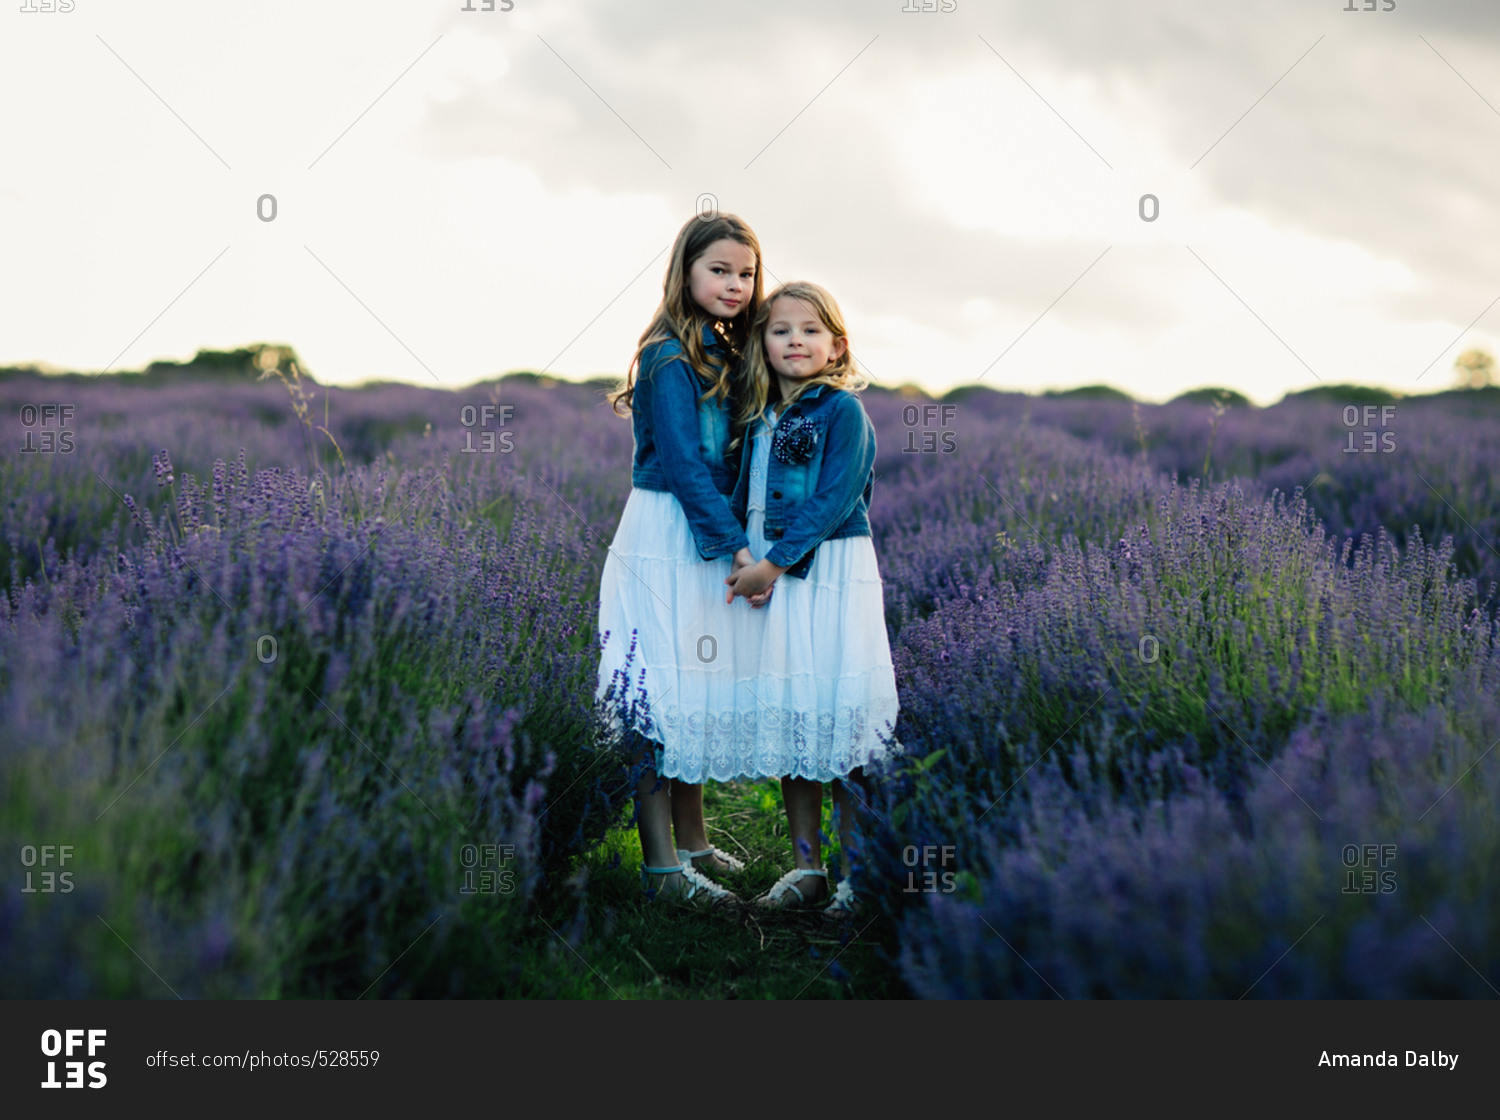 Two sisters holding hands and standing together in a field of lavender flowers